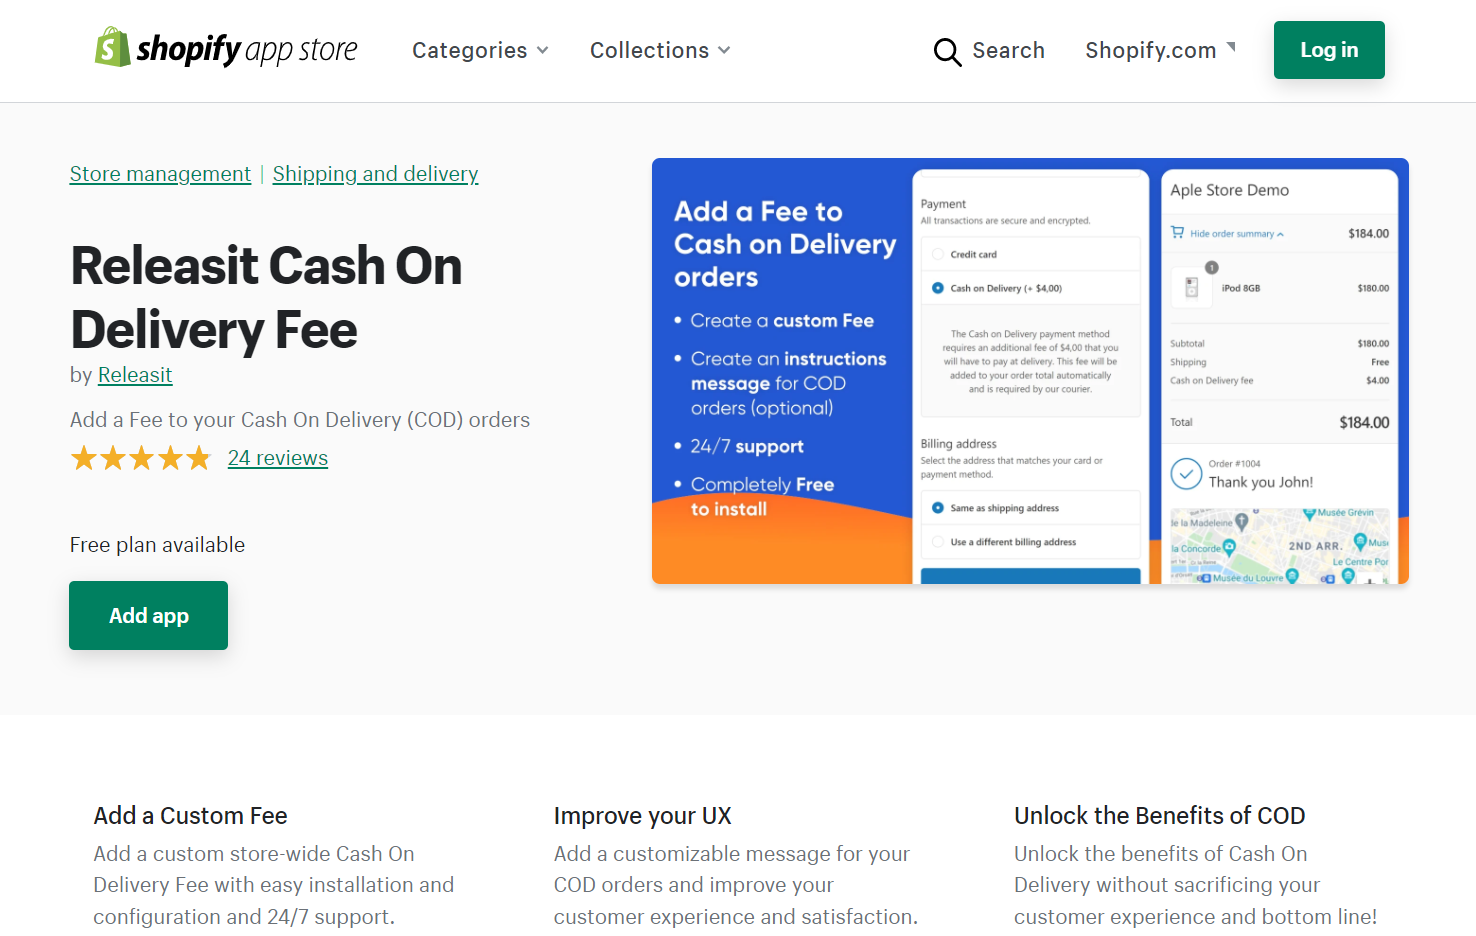 Releasit Cash On Delivery Fee app on Shopify App Store